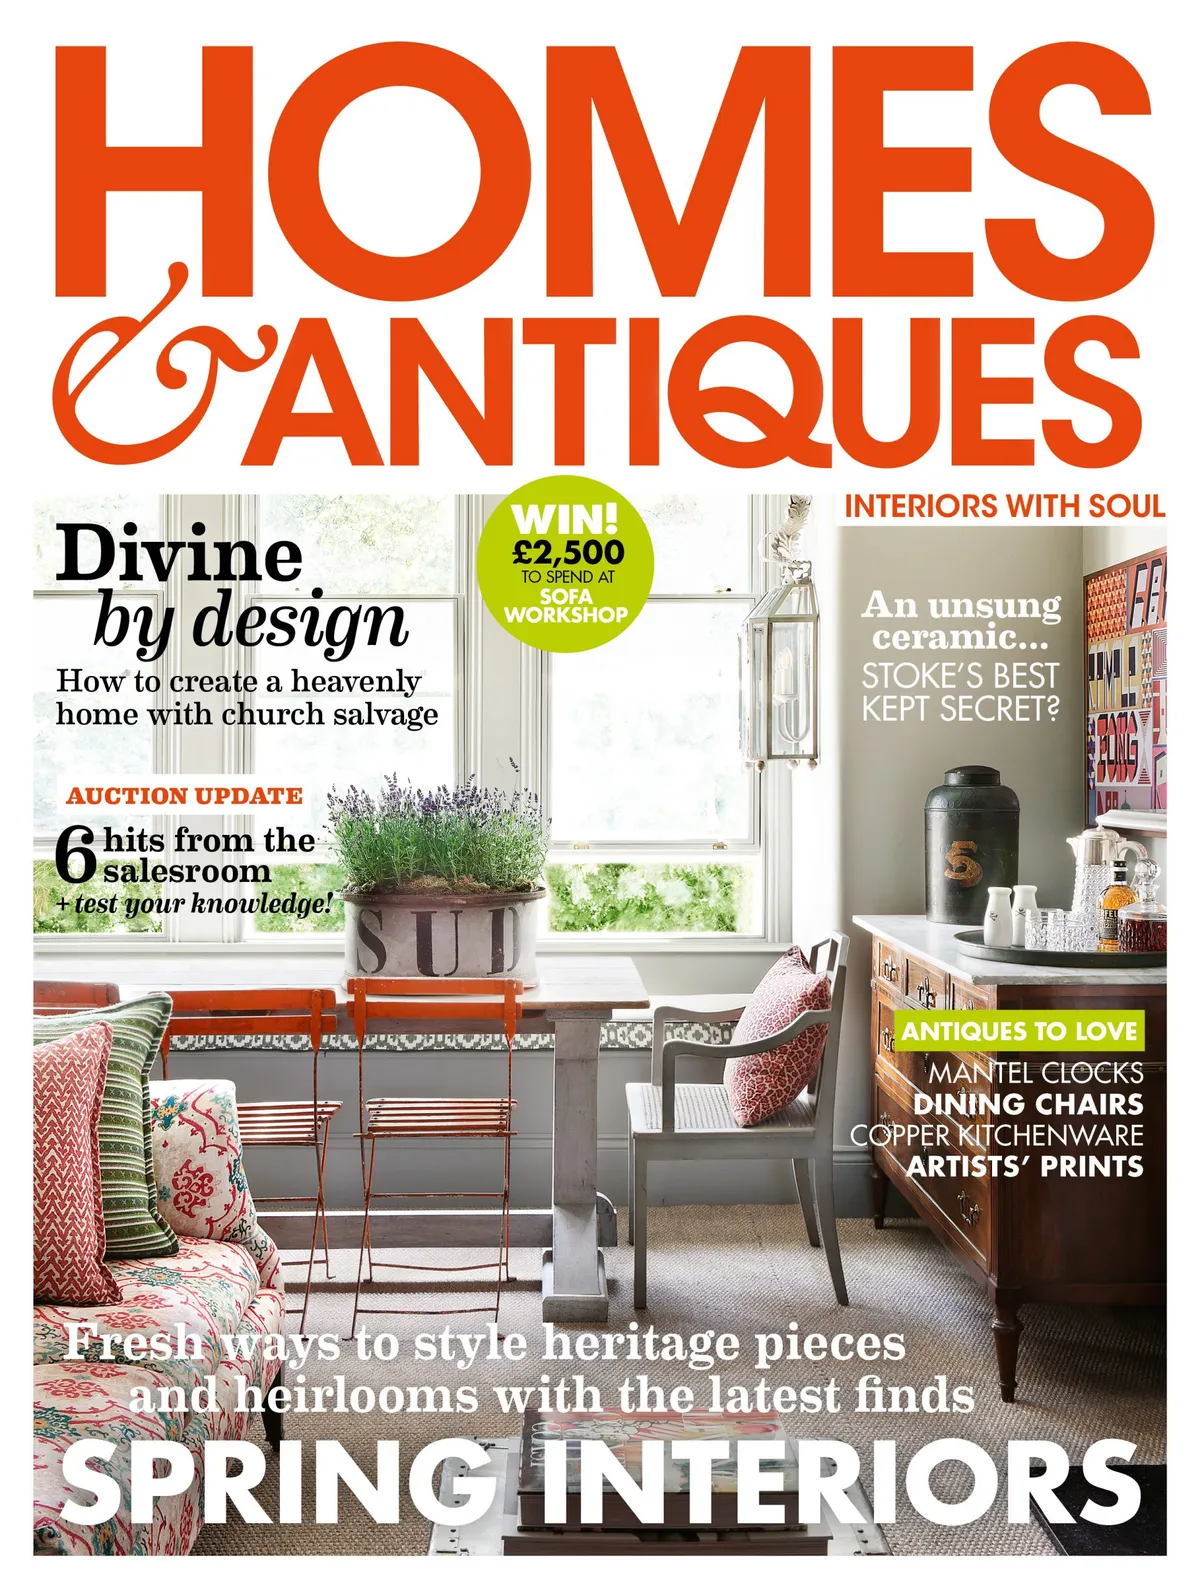 Homes & Antiques March 2020 cover